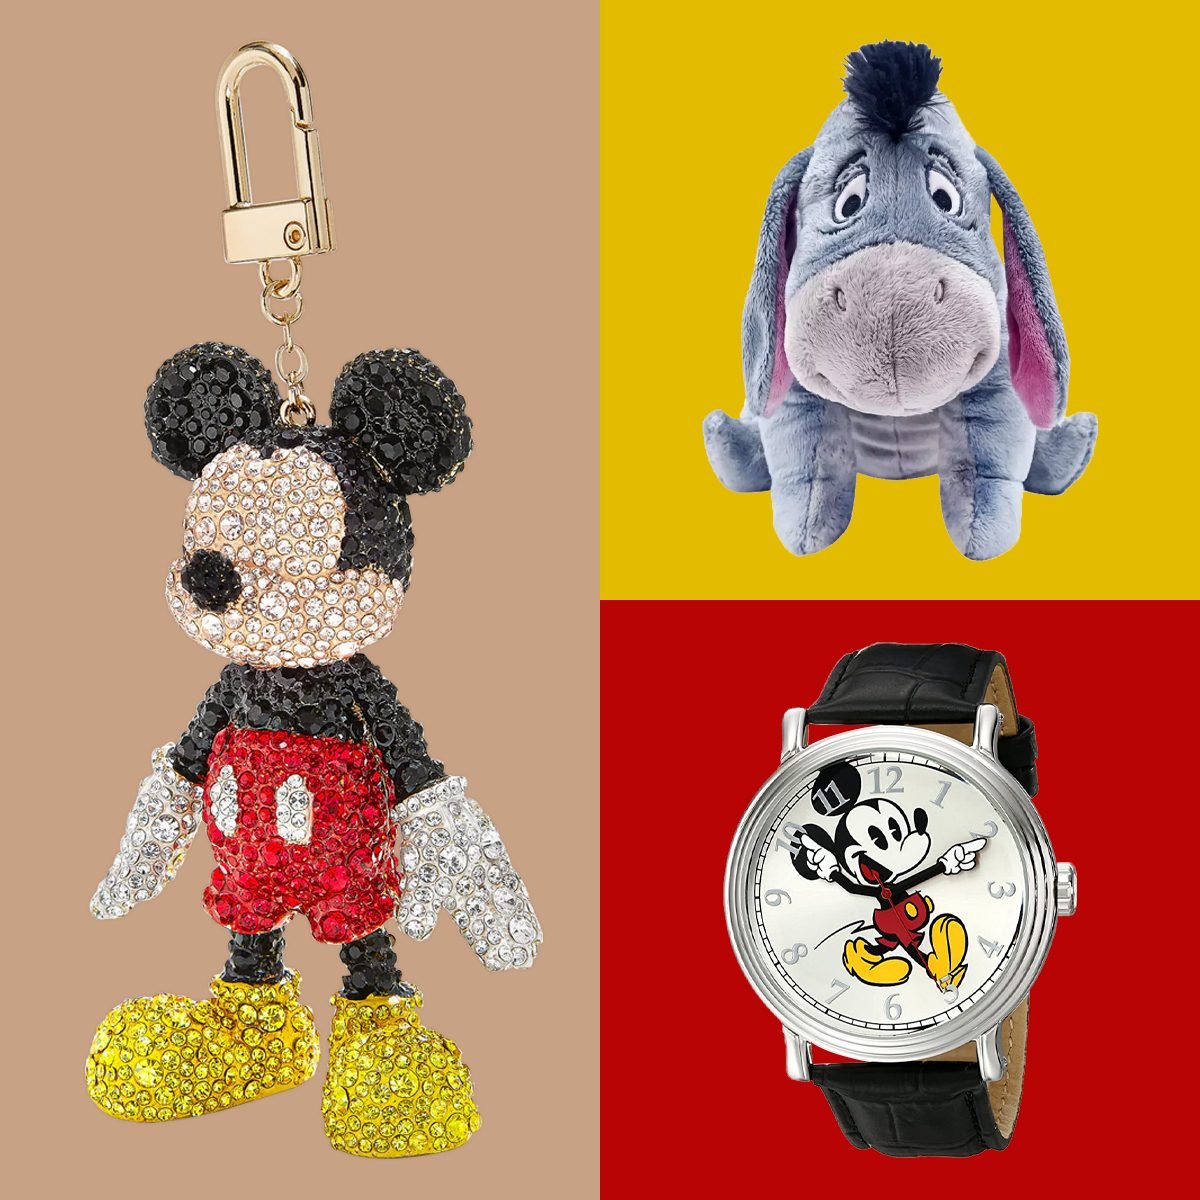 https://www.rd.com/wp-content/uploads/2023/02/45-Magical-Disney-Gifts-for-Mouseketeers-of-All-Ages-via-merchant3.jpg